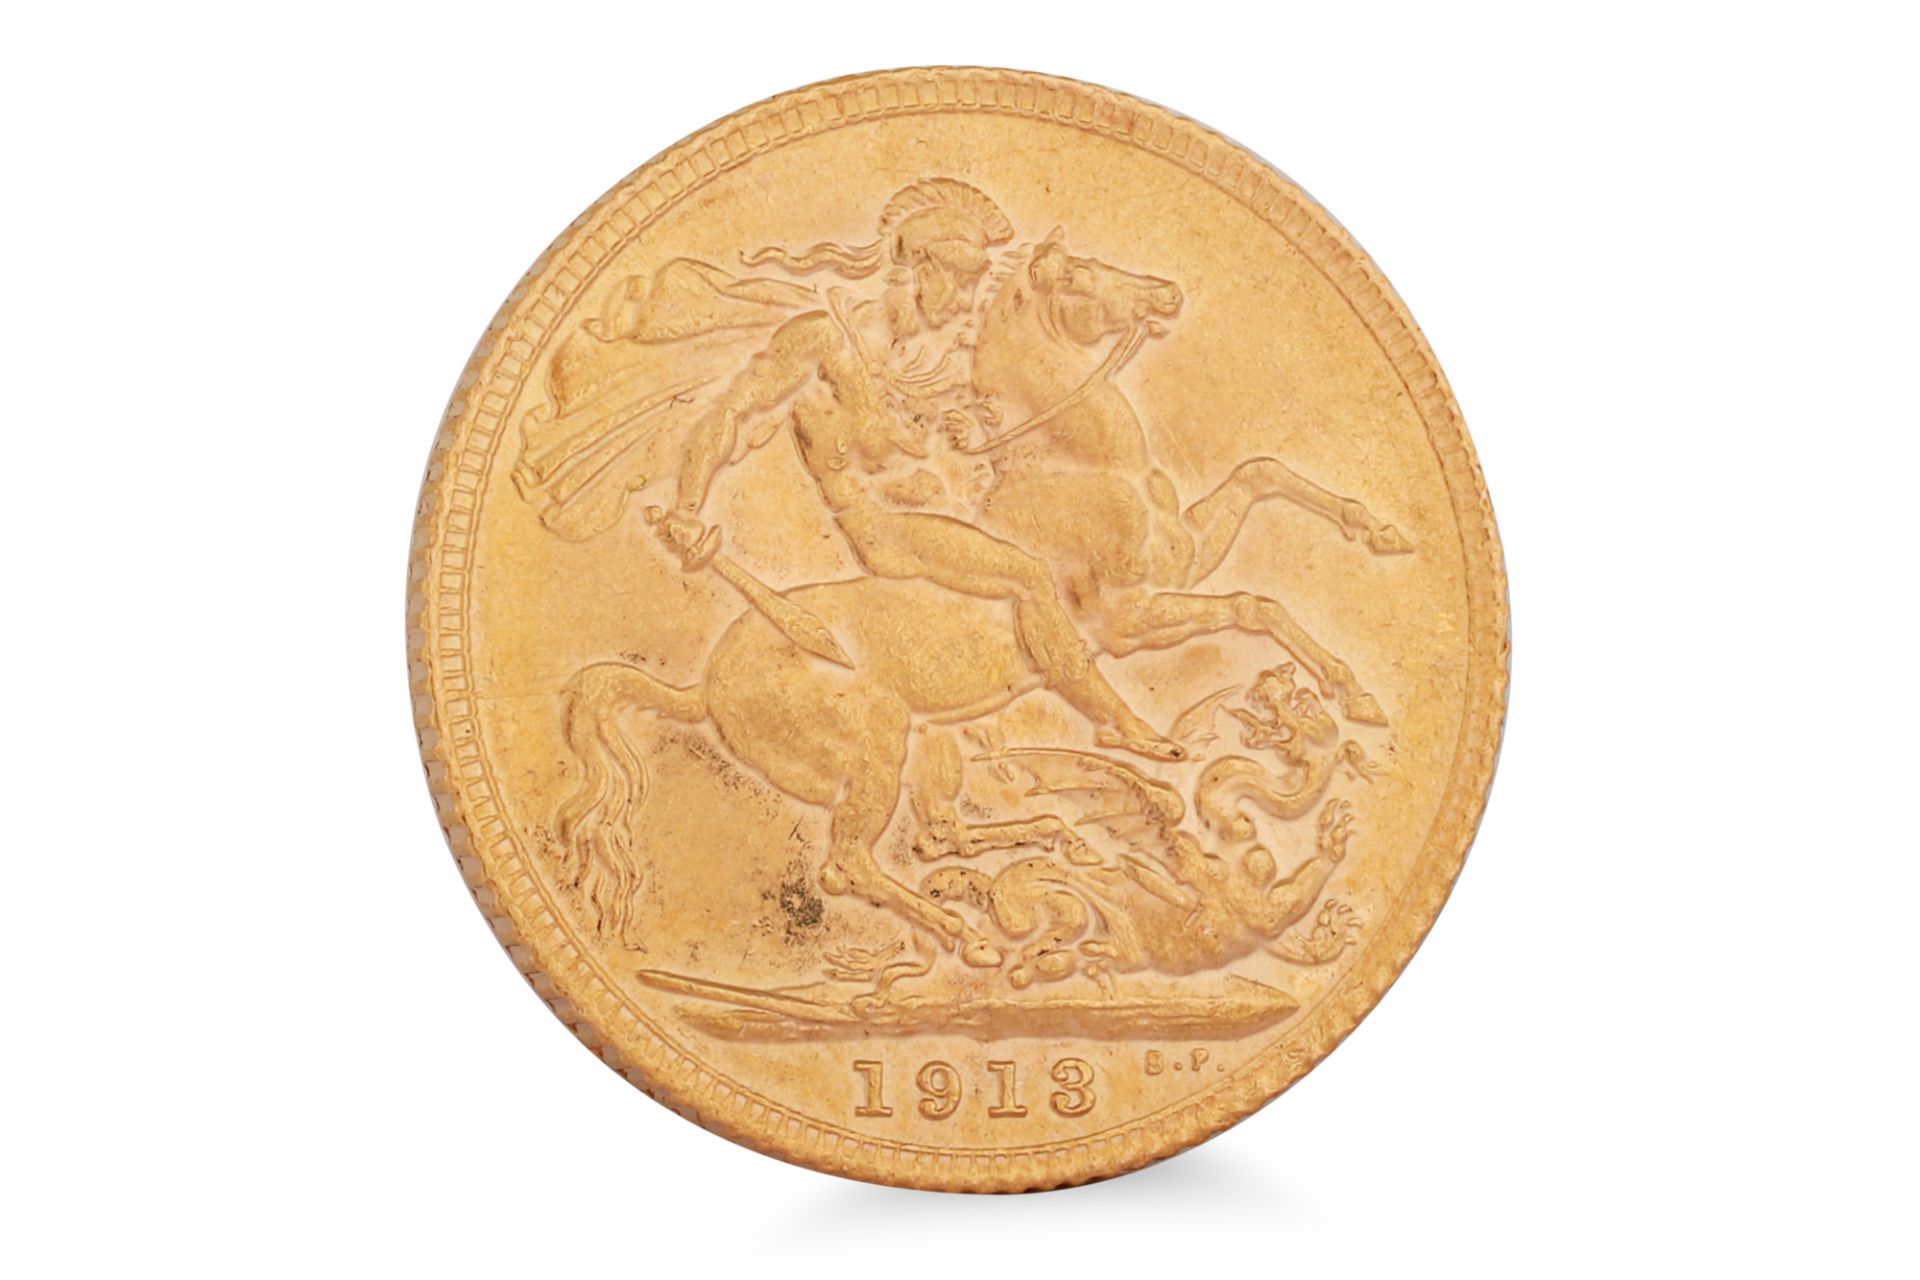 A GEORGE V GOLD FULL SOVEREIGN ENGLISH COIN 1913, 8 g.